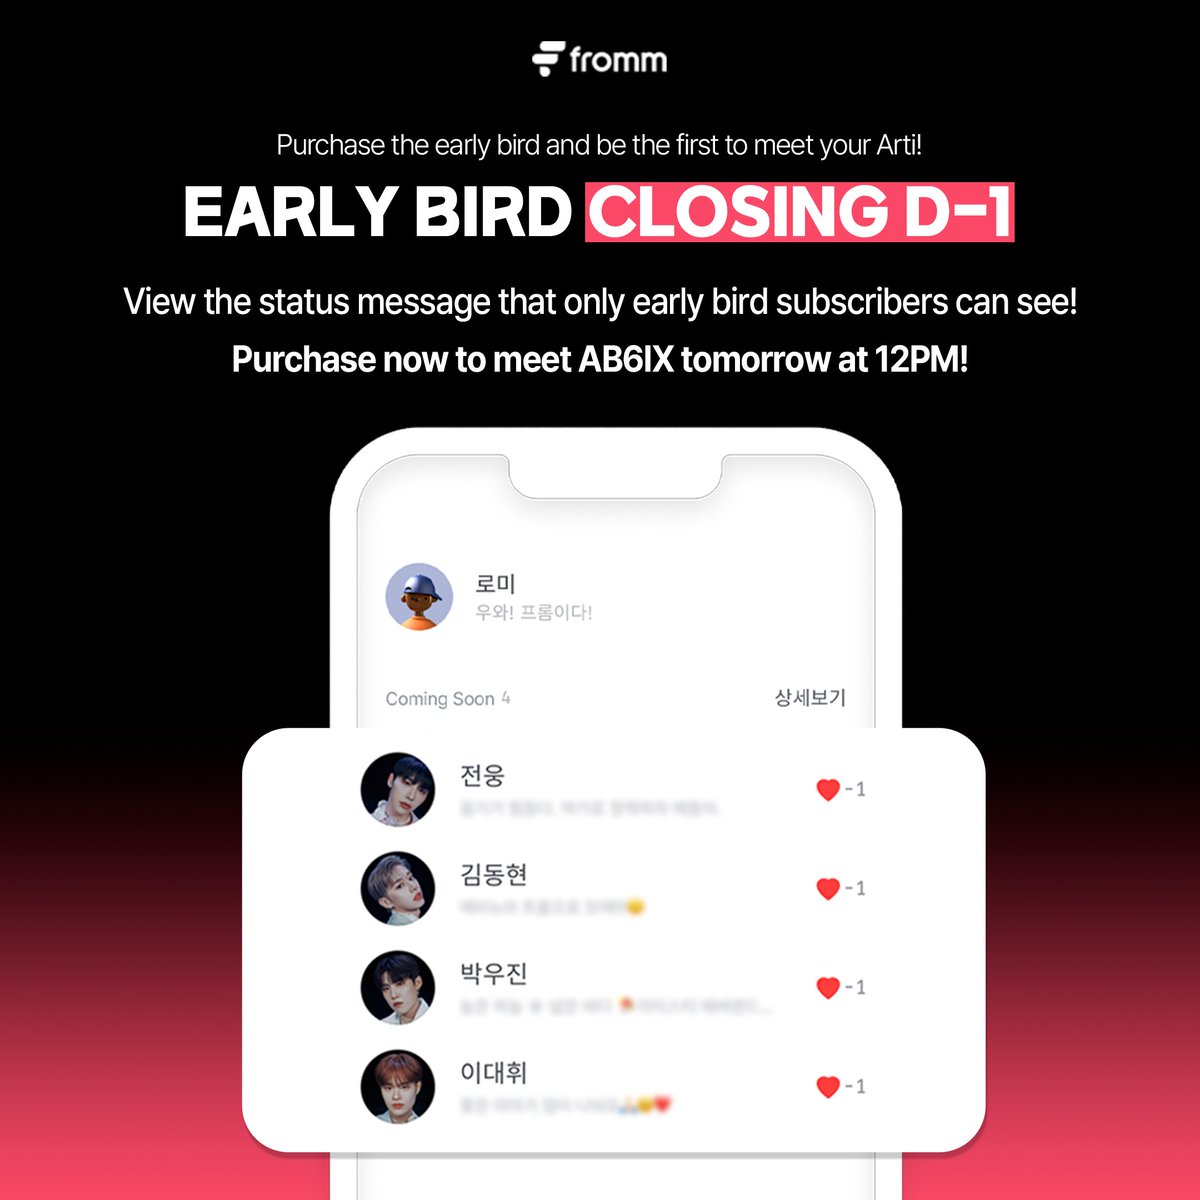 [⏰] 𝐟𝐫𝐨𝐦𝐦 𝐱 𝐀𝐁𝟔𝐈𝐗 𝐄𝐀𝐑𝐋𝐘 𝐁𝐈𝐑𝐃 𝐂𝐋𝐎𝐒𝐈𝐍𝐆 𝐃-𝟏 AB6IX’s status message that only early bird subscribers can see?👀 🔗 bit.ly/49BNEou *This benefit is only available through this link The fromm AB6IX Early Bird event is closing soon! Don’t miss